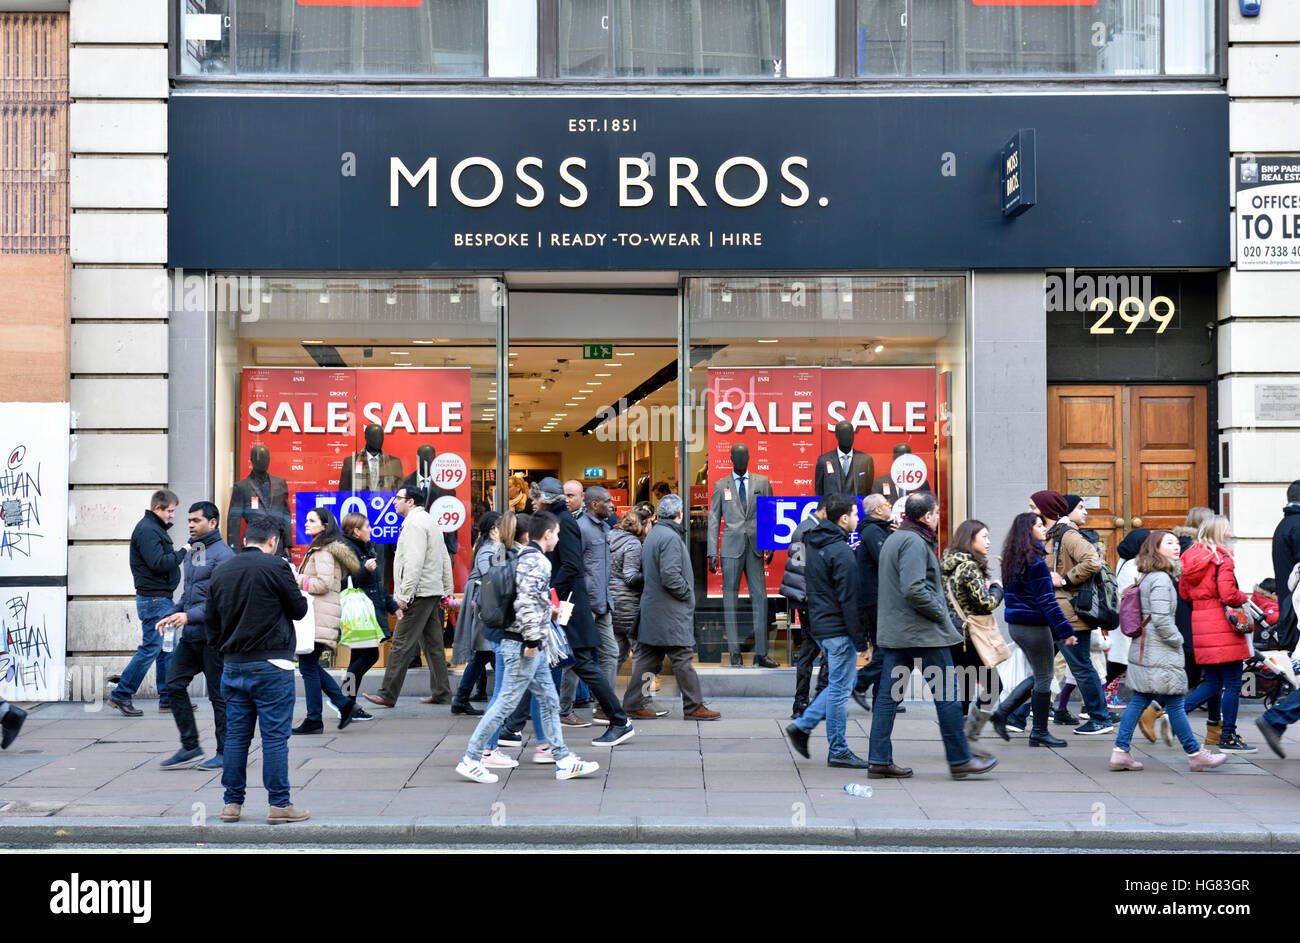 Moss Bros Sale with people passing, Oxford Street, London, England Britain UK Stock Photo